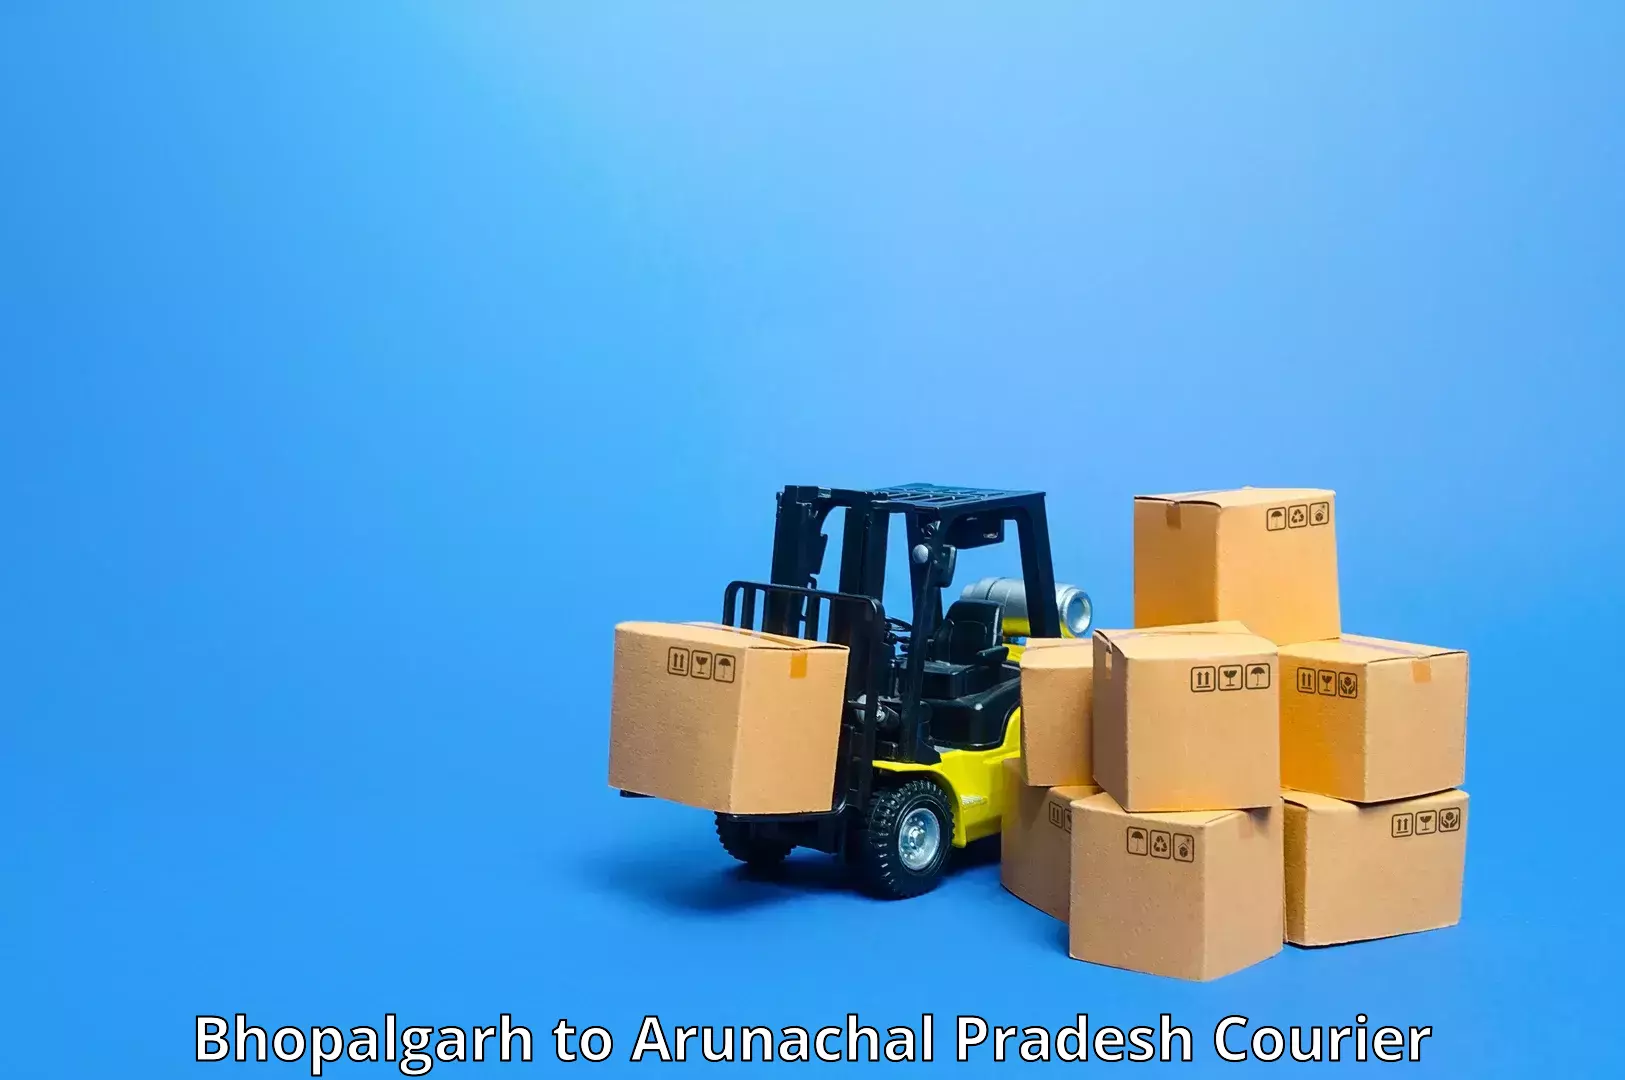 Express delivery capabilities Bhopalgarh to Pasighat